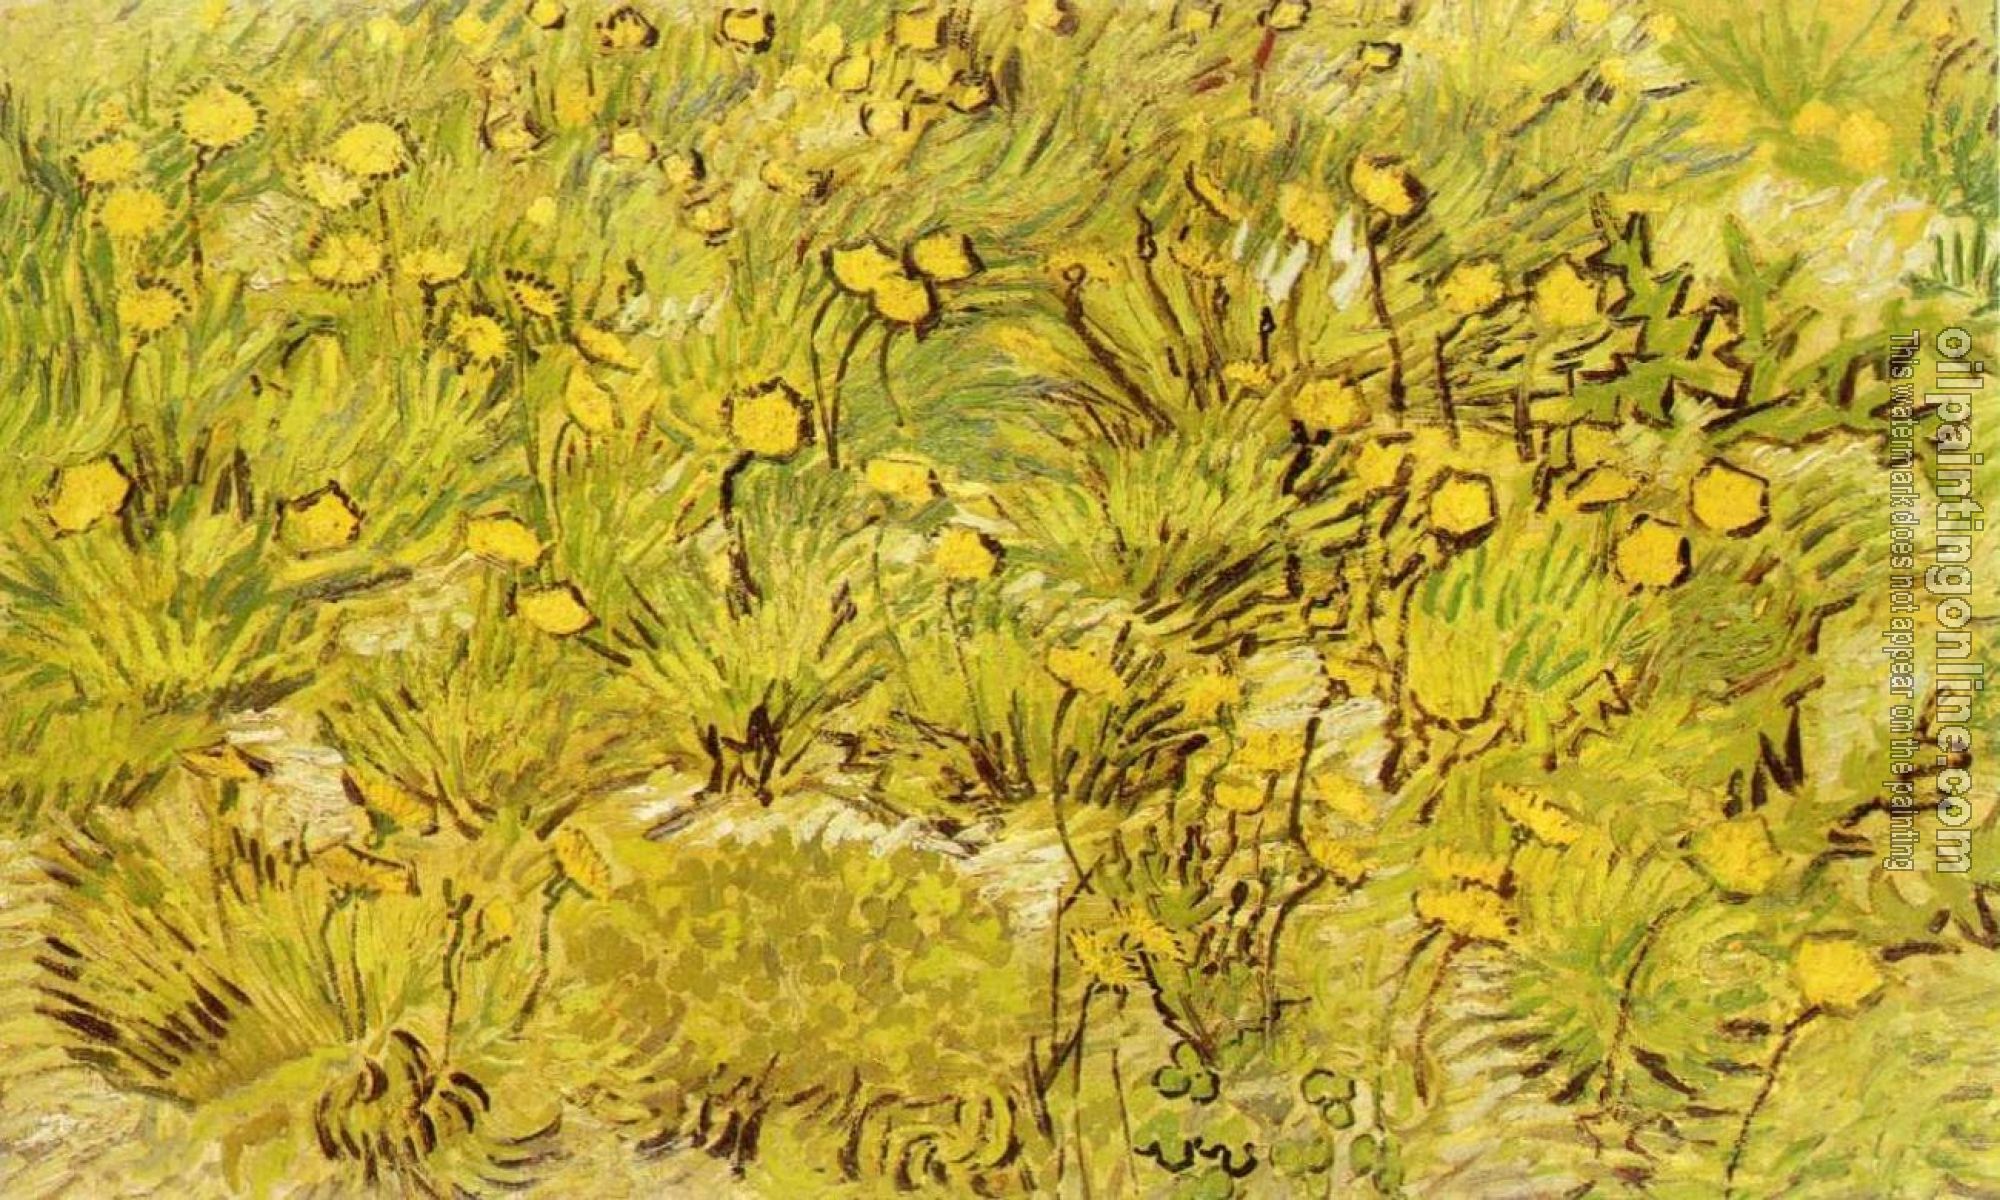 Gogh, Vincent van - A Field of Yellow Flowers